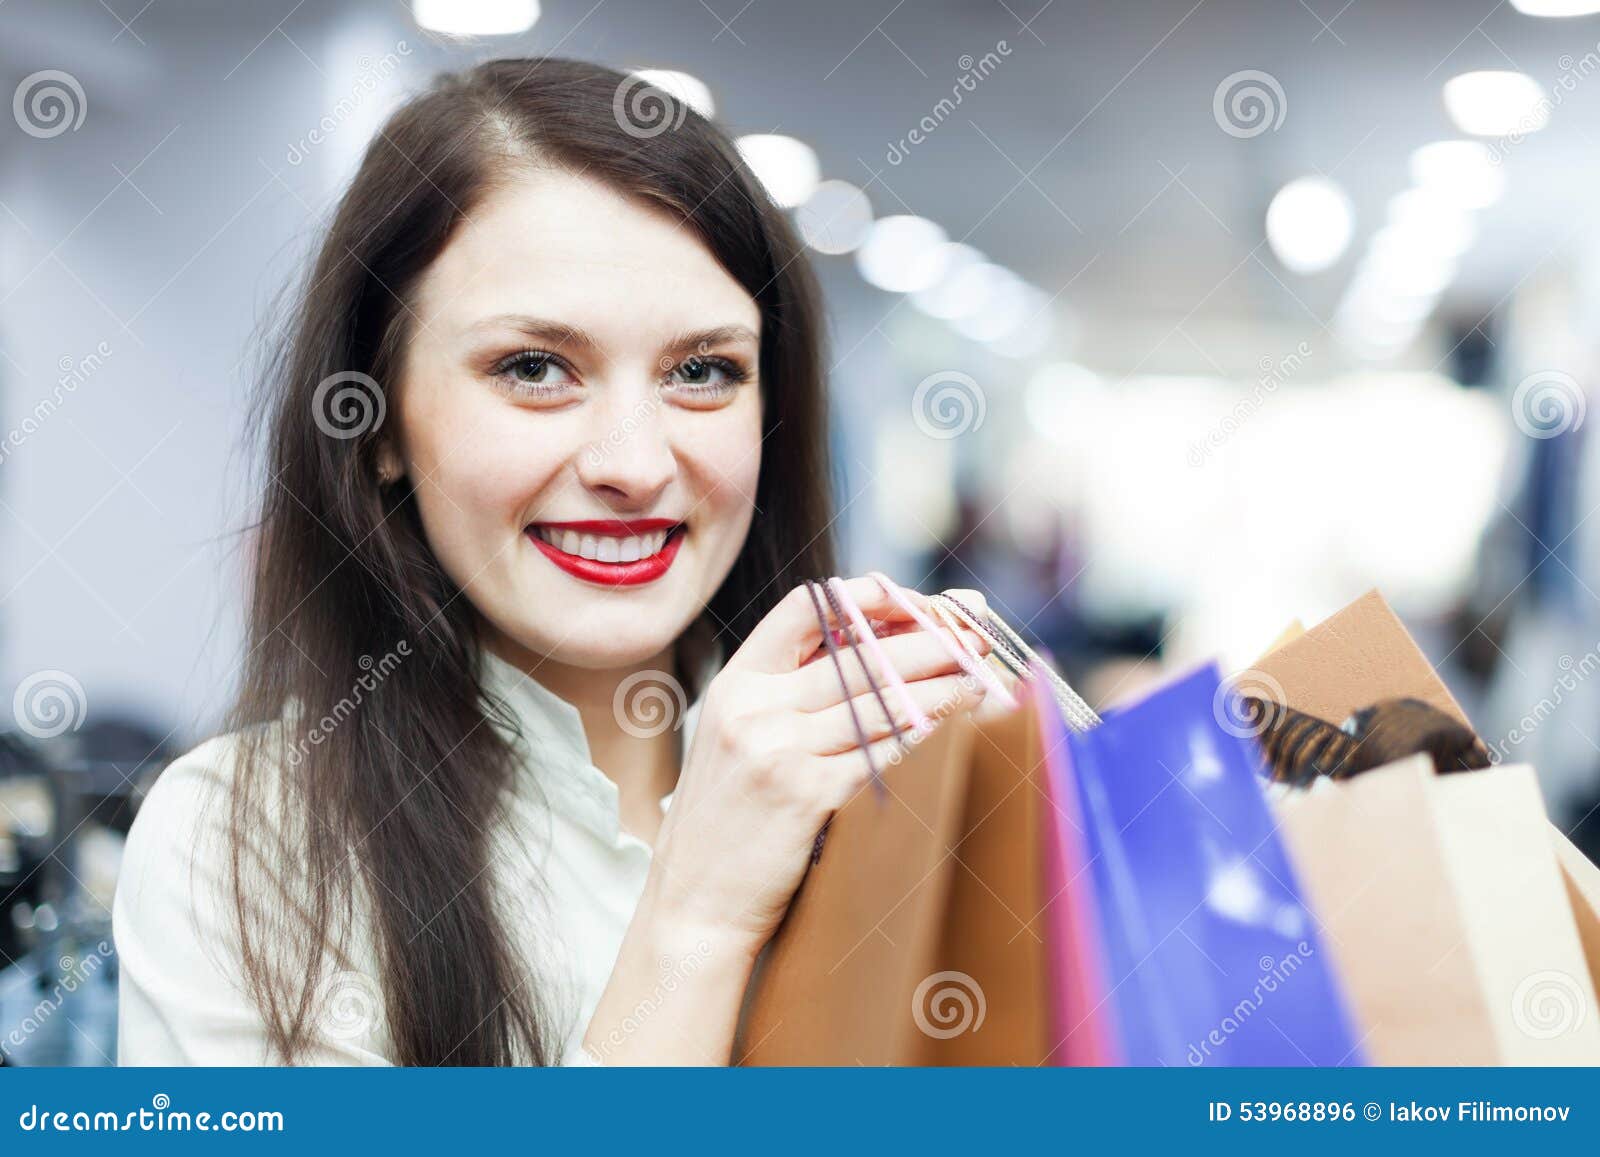 Portrait of Young Female Buyer Stock Photo - Image of casual, holding ...